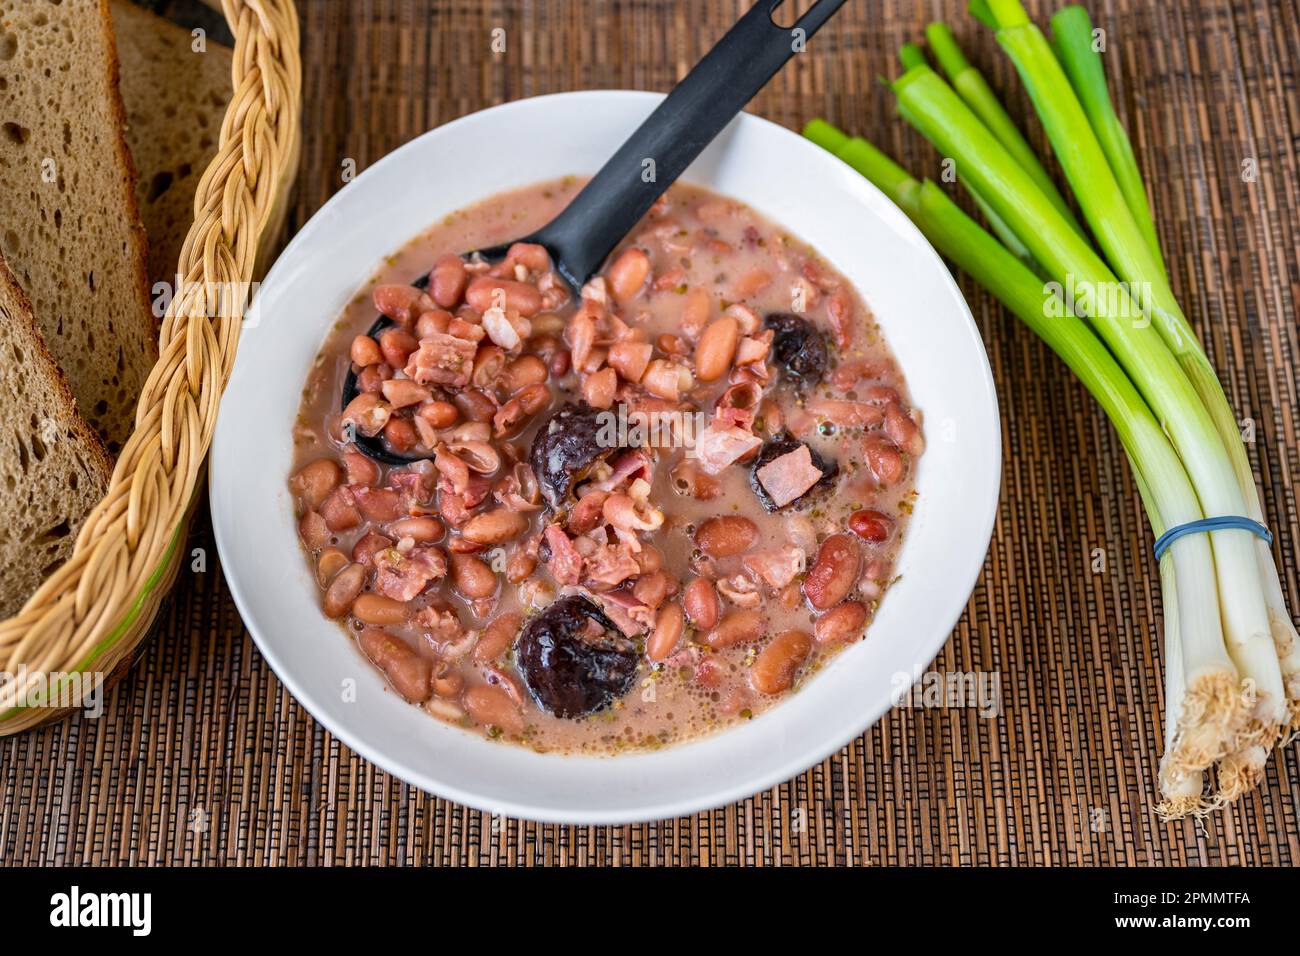 Legume soup from bean and plum in white plate, green onion, bread on table. Stock Photo